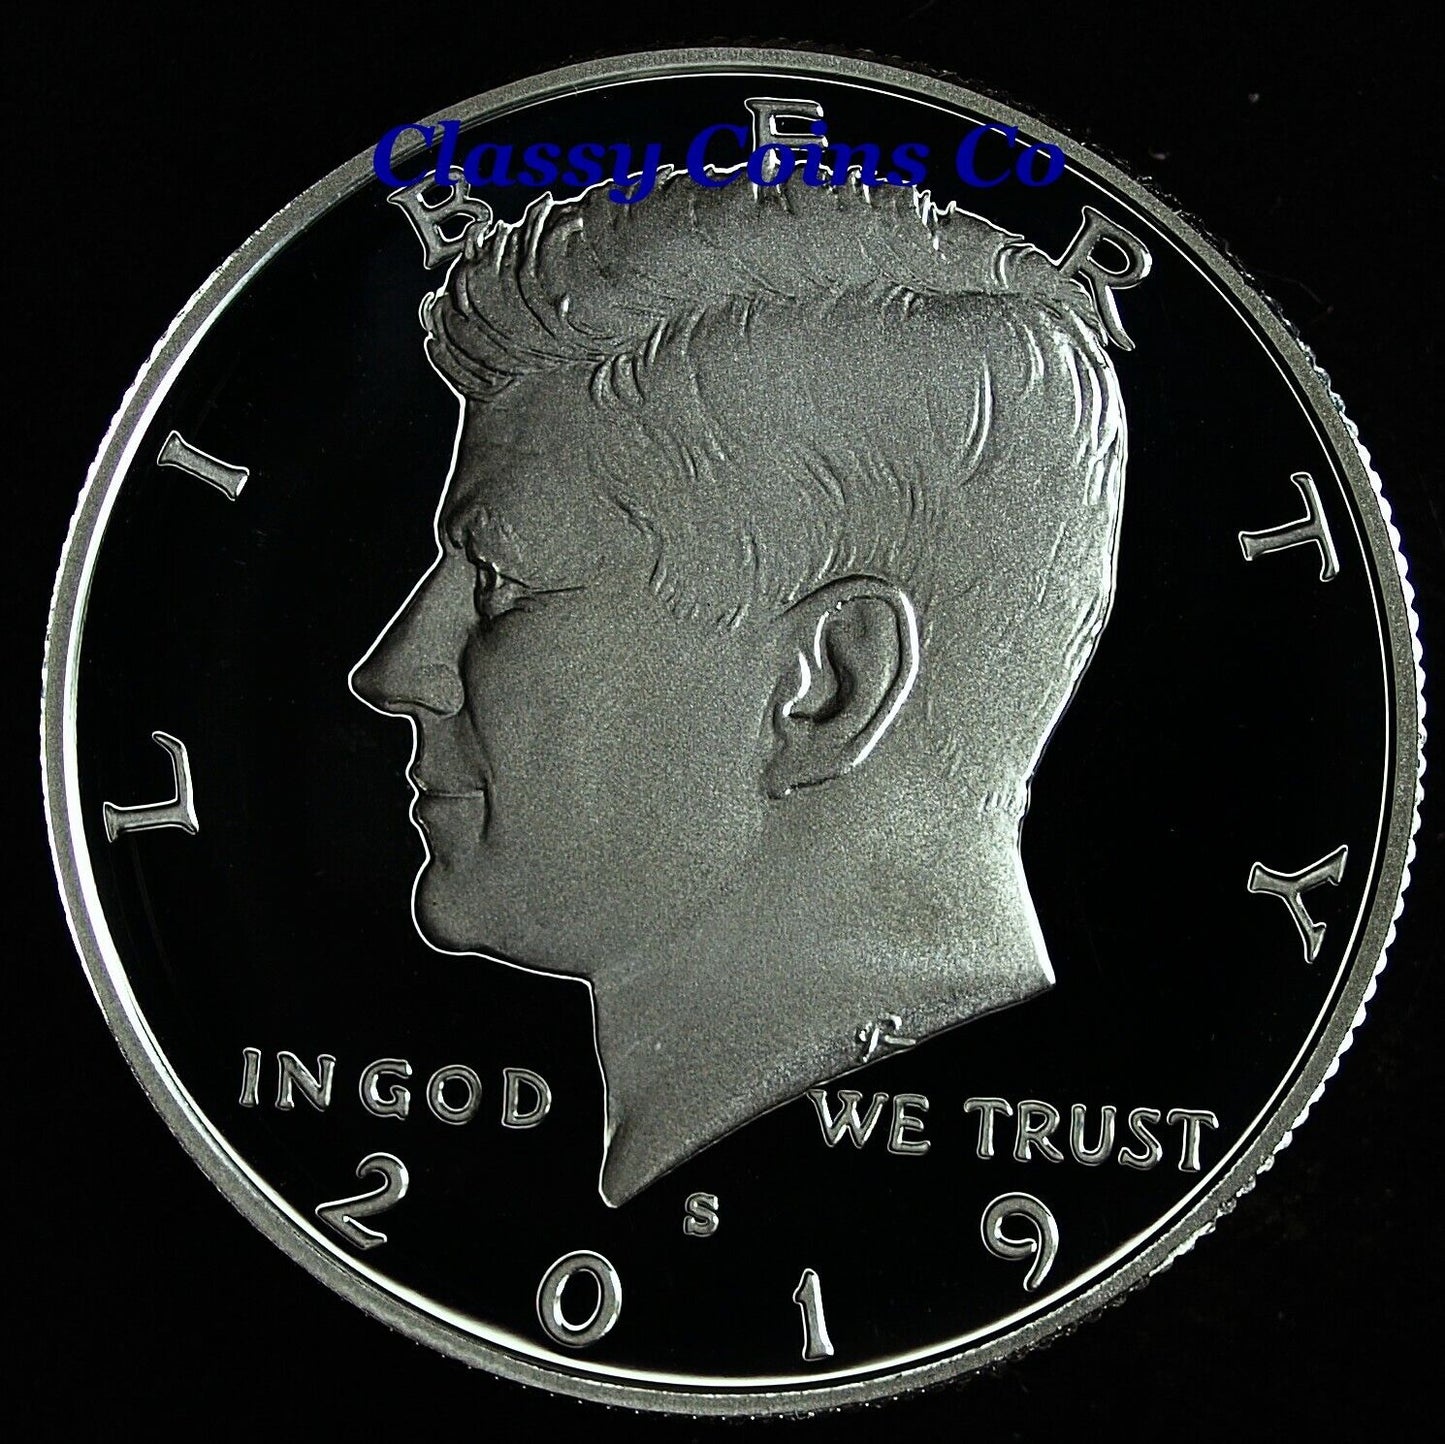 2019 S Proof Silver Kennedy Half Dollar ☆☆ .999 Fine Silver ☆☆ Great For Sets